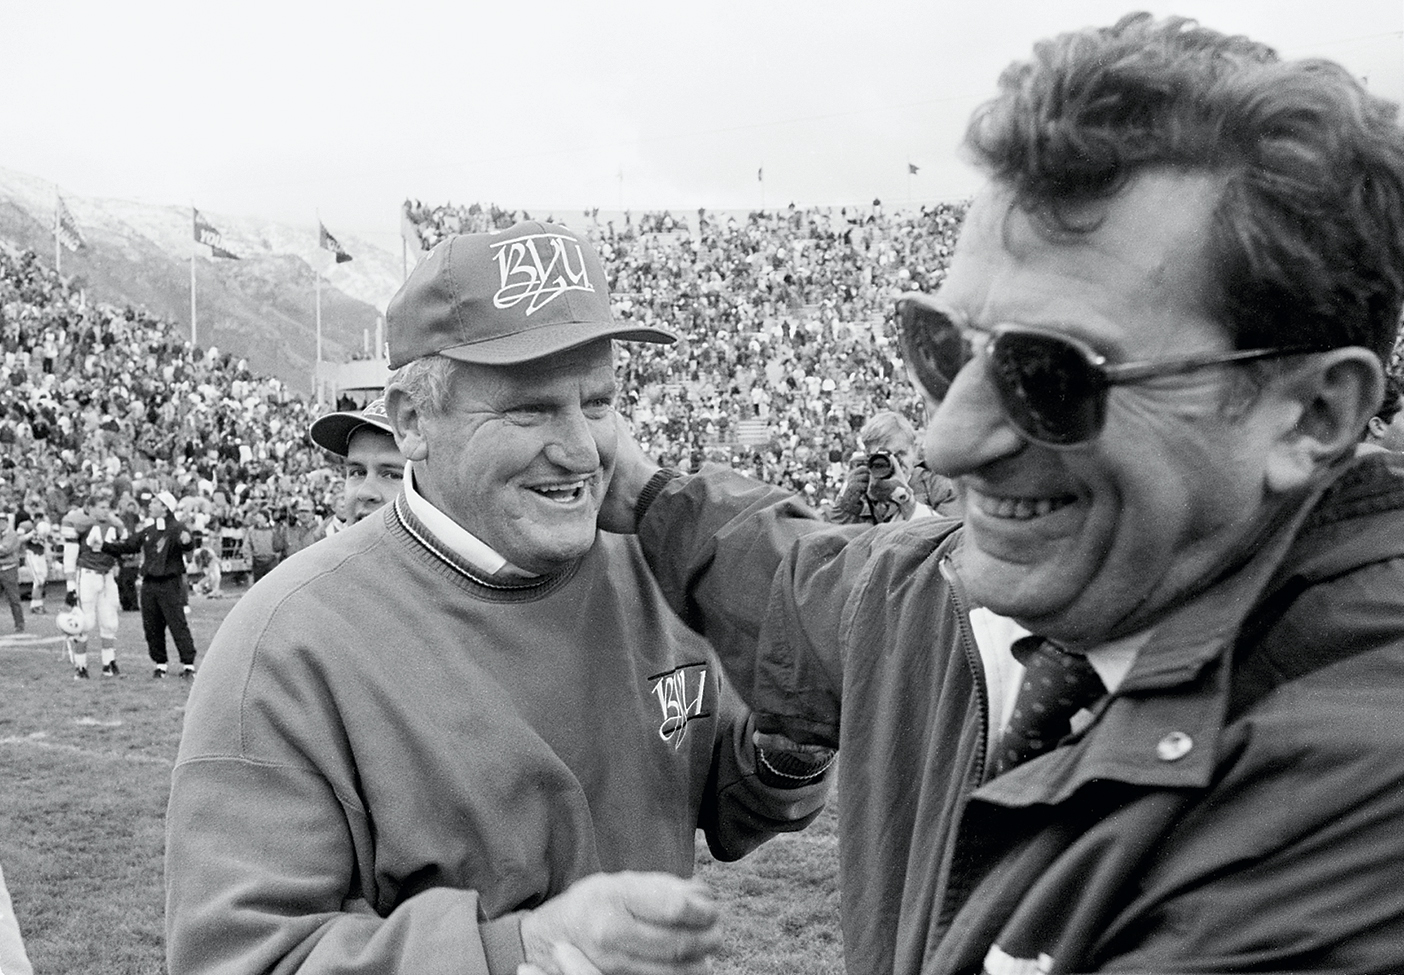 LaVell Edwards with Joe Paterno on a football field